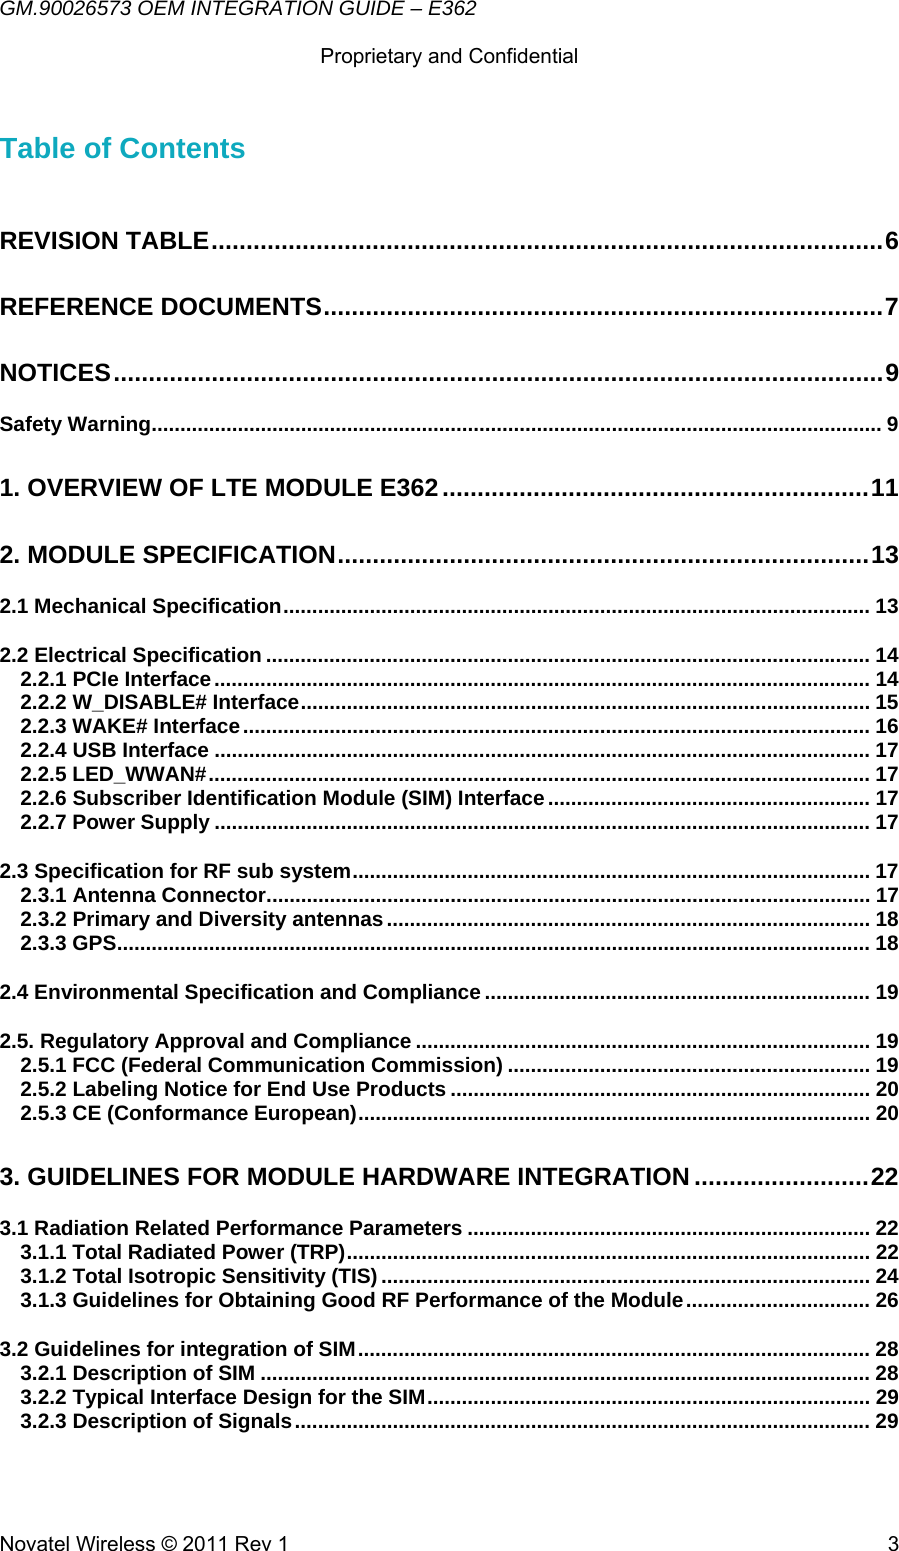 GM.90026573 OEM INTEGRATION GUIDE – E362      Proprietary and Confidential   Novatel Wireless © 2011 Rev 1  3Table of Contents  REVISION TABLE ................................................................................................ 6REFERENCE DOCUMENTS ................................................................................ 7NOTICES .............................................................................................................. 9Safety Warning ............................................................................................................................... 91. OVERVIEW OF LTE MODULE E362 ............................................................. 112. MODULE SPECIFICATION ............................................................................ 132.1 Mechanical Specification ...................................................................................................... 132.2 Electrical Specification ......................................................................................................... 142.2.1 PCIe Interface .................................................................................................................. 142.2.2 W_DISABLE# Interface ................................................................................................... 152.2.3 WAKE# Interface ............................................................................................................. 162.2.4 USB Interface .................................................................................................................. 172.2.5 LED_WWAN# ................................................................................................................... 172.2.6 Subscriber Identification Module (SIM) Interface ........................................................ 172.2.7 Power Supply .................................................................................................................. 172.3 Specification for RF sub system .......................................................................................... 172.3.1 Antenna Connector ......................................................................................................... 172.3.2 Primary and Diversity antennas .................................................................................... 182.3.3 GPS ................................................................................................................................... 182.4 Environmental Specification and Compliance ................................................................... 192.5. Regulatory Approval and Compliance ............................................................................... 192.5.1 FCC (Federal Communication Commission) ............................................................... 192.5.2 Labeling Notice for End Use Products ......................................................................... 202.5.3 CE (Conformance European) ......................................................................................... 203. GUIDELINES FOR MODULE HARDWARE INTEGRATION ......................... 223.1 Radiation Related Performance Parameters ...................................................................... 223.1.1 Total Radiated Power (TRP) ........................................................................................... 223.1.2 Total Isotropic Sensitivity (TIS) ..................................................................................... 243.1.3 Guidelines for Obtaining Good RF Performance of the Module ................................ 263.2 Guidelines for integration of SIM ......................................................................................... 283.2.1 Description of SIM .......................................................................................................... 283.2.2 Typical Interface Design for the SIM ............................................................................. 293.2.3 Description of Signals .................................................................................................... 29